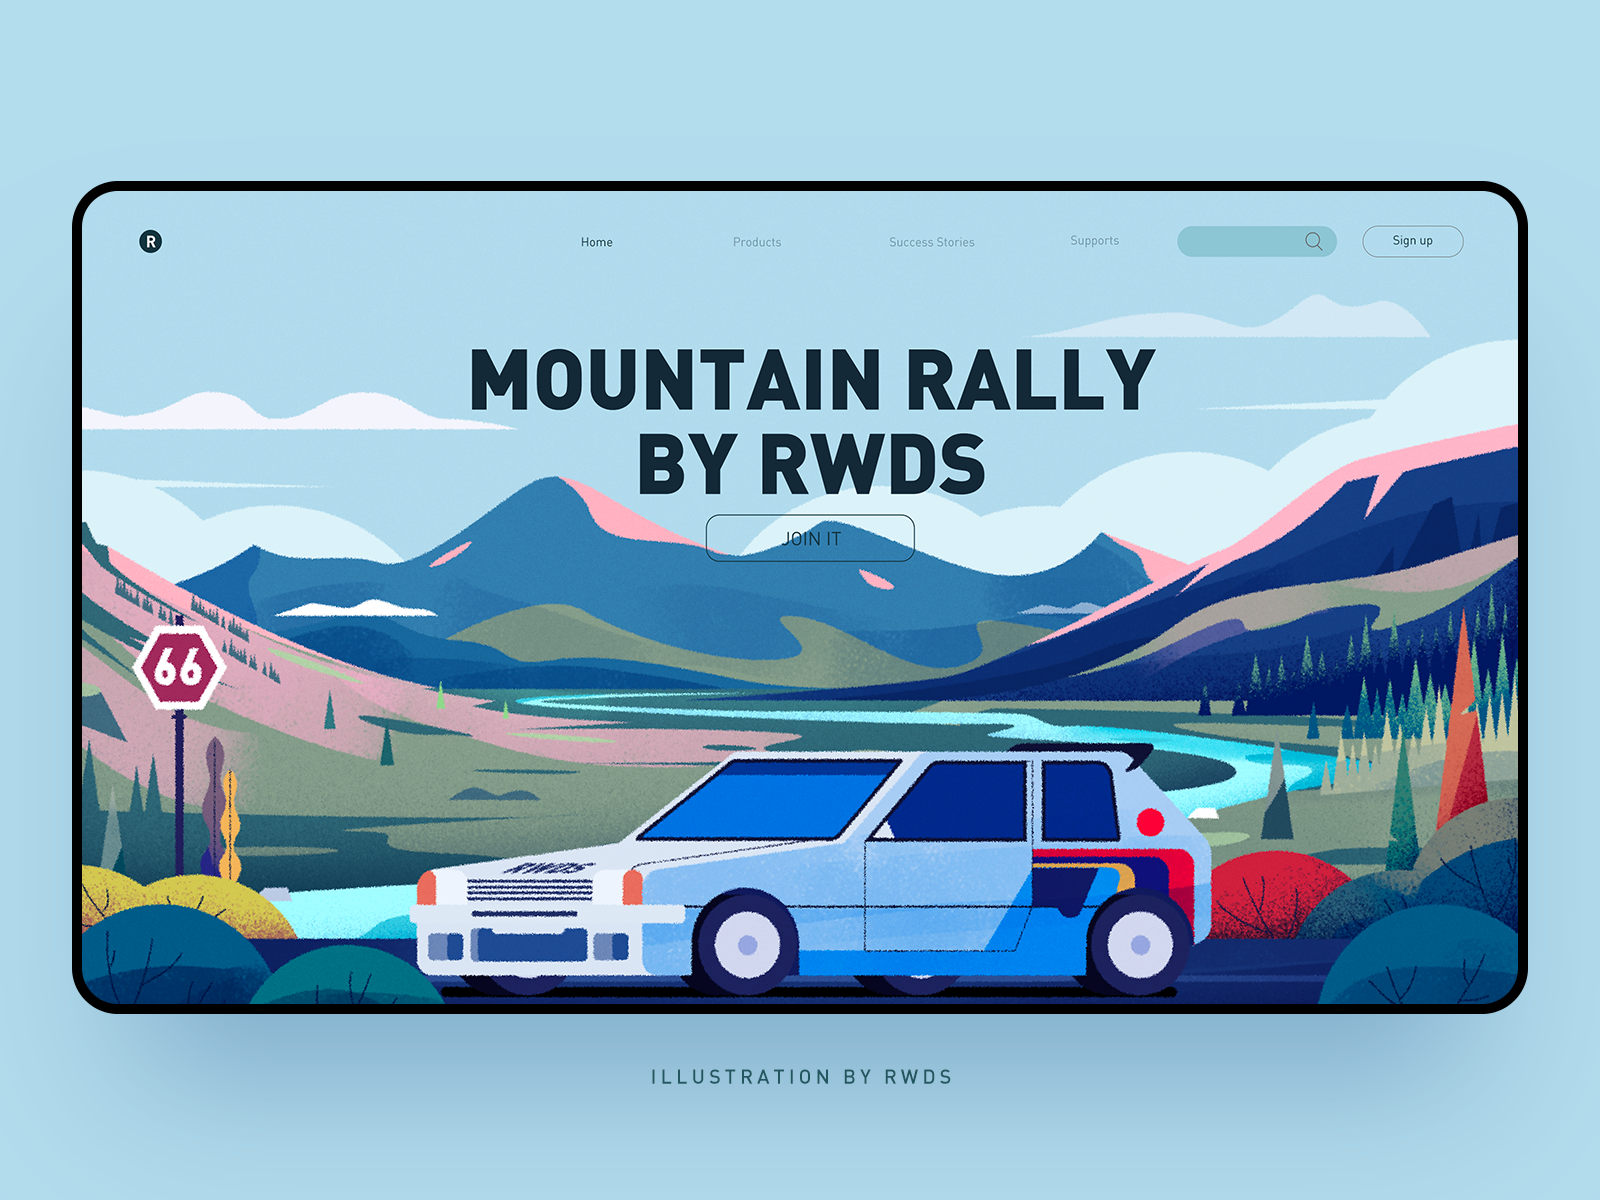 Mountain car hills illustration landscape mountain mountains river road scenery tree valley